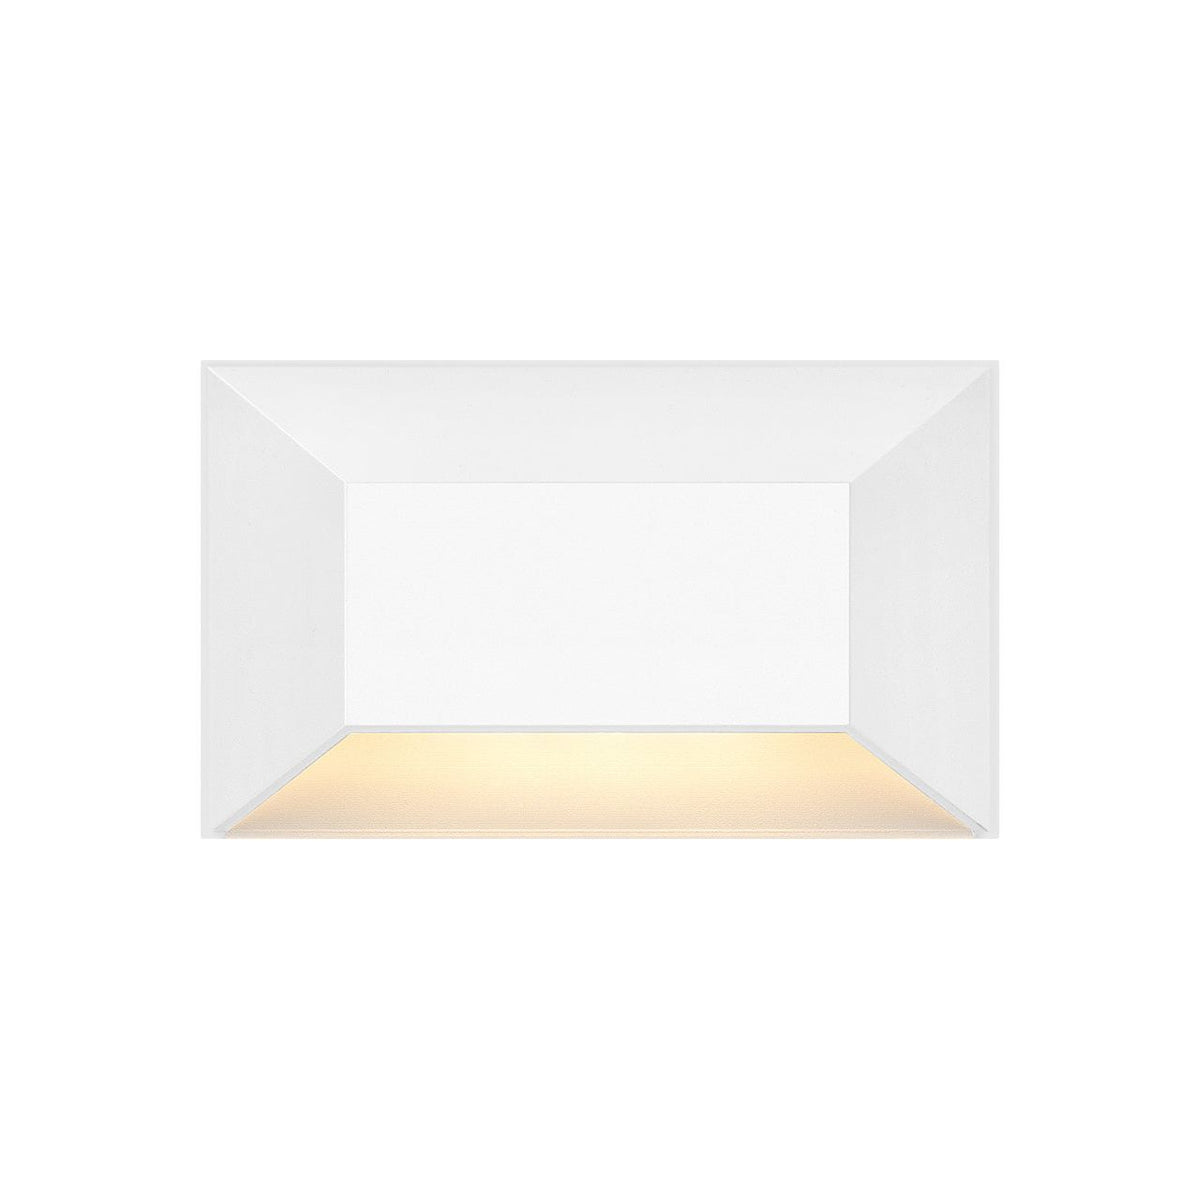 Hinkley Canada - 15225MW - LED Wall Sconce - Nuvi Deck Sconce - Matte White